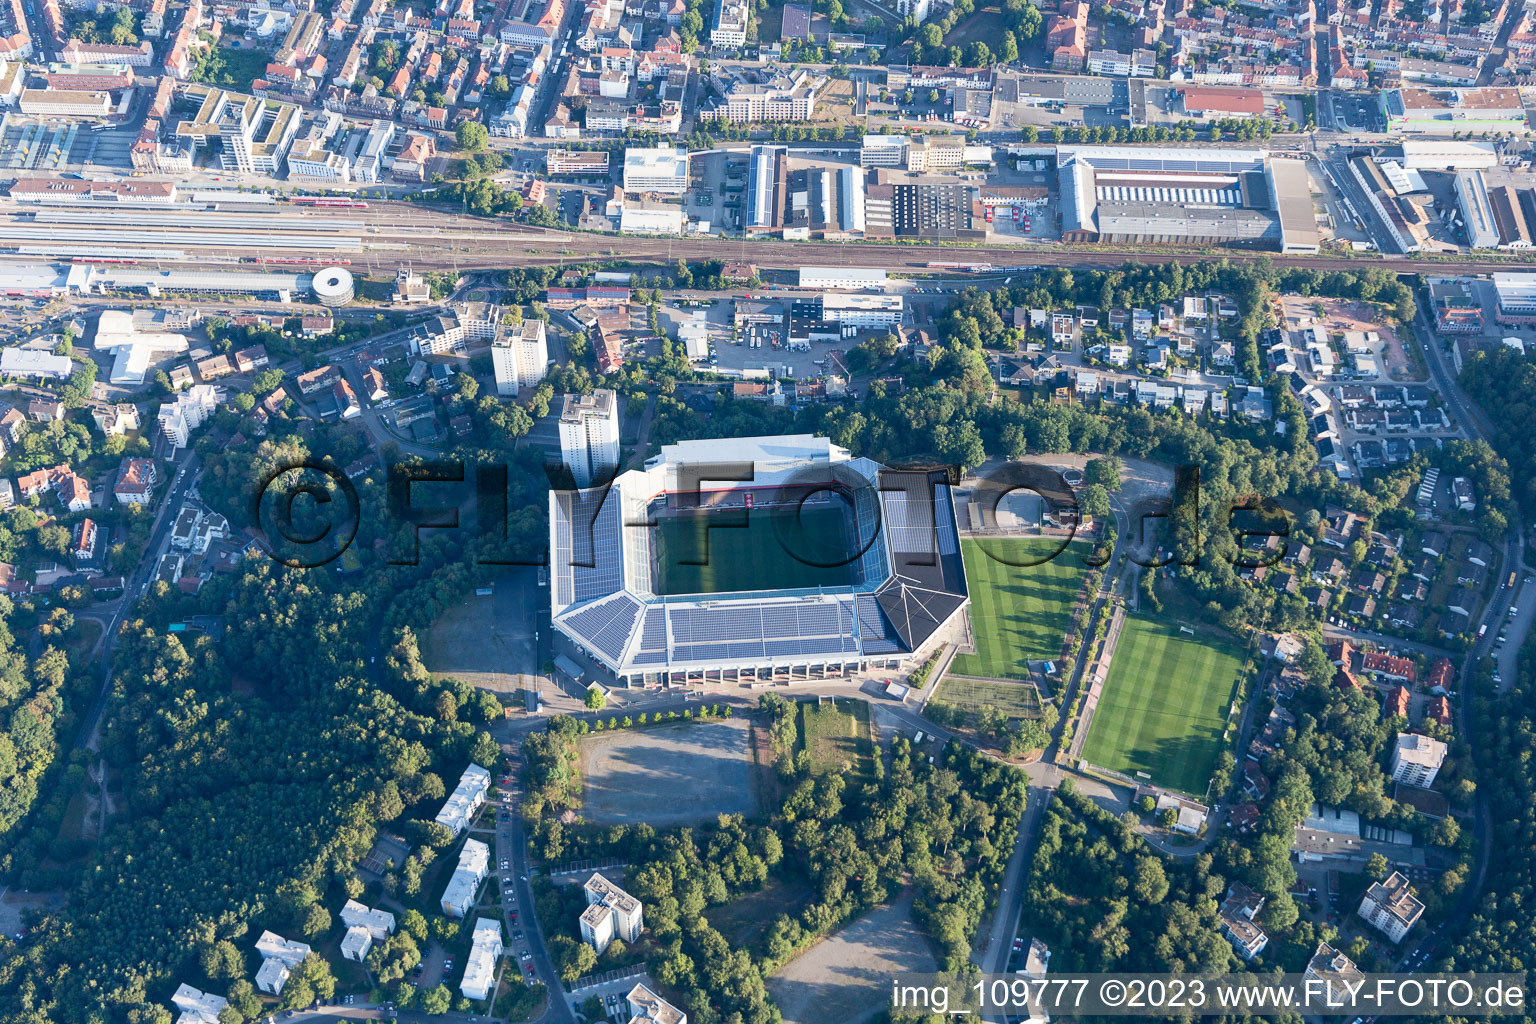 Oblique view of Fritz-Walter Stadium of the FCK on the Betzenberg in Kaiserslautern in the state Rhineland-Palatinate, Germany